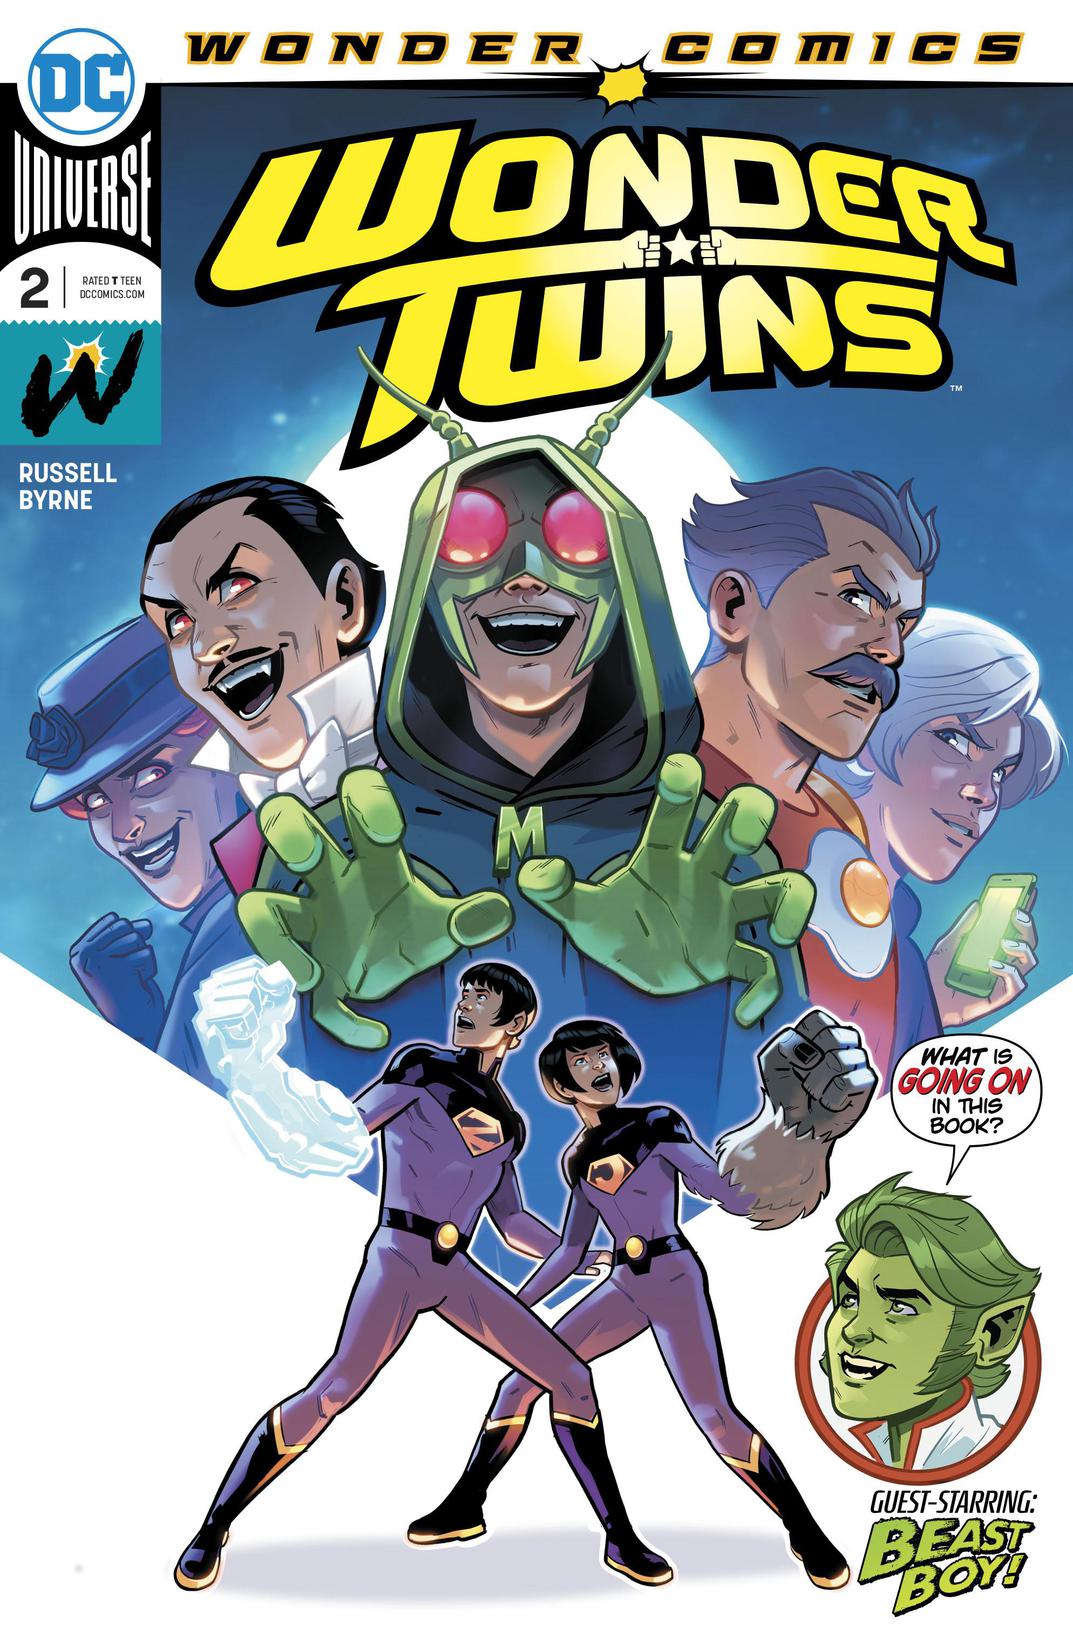 Wonder Twins #2 preview images